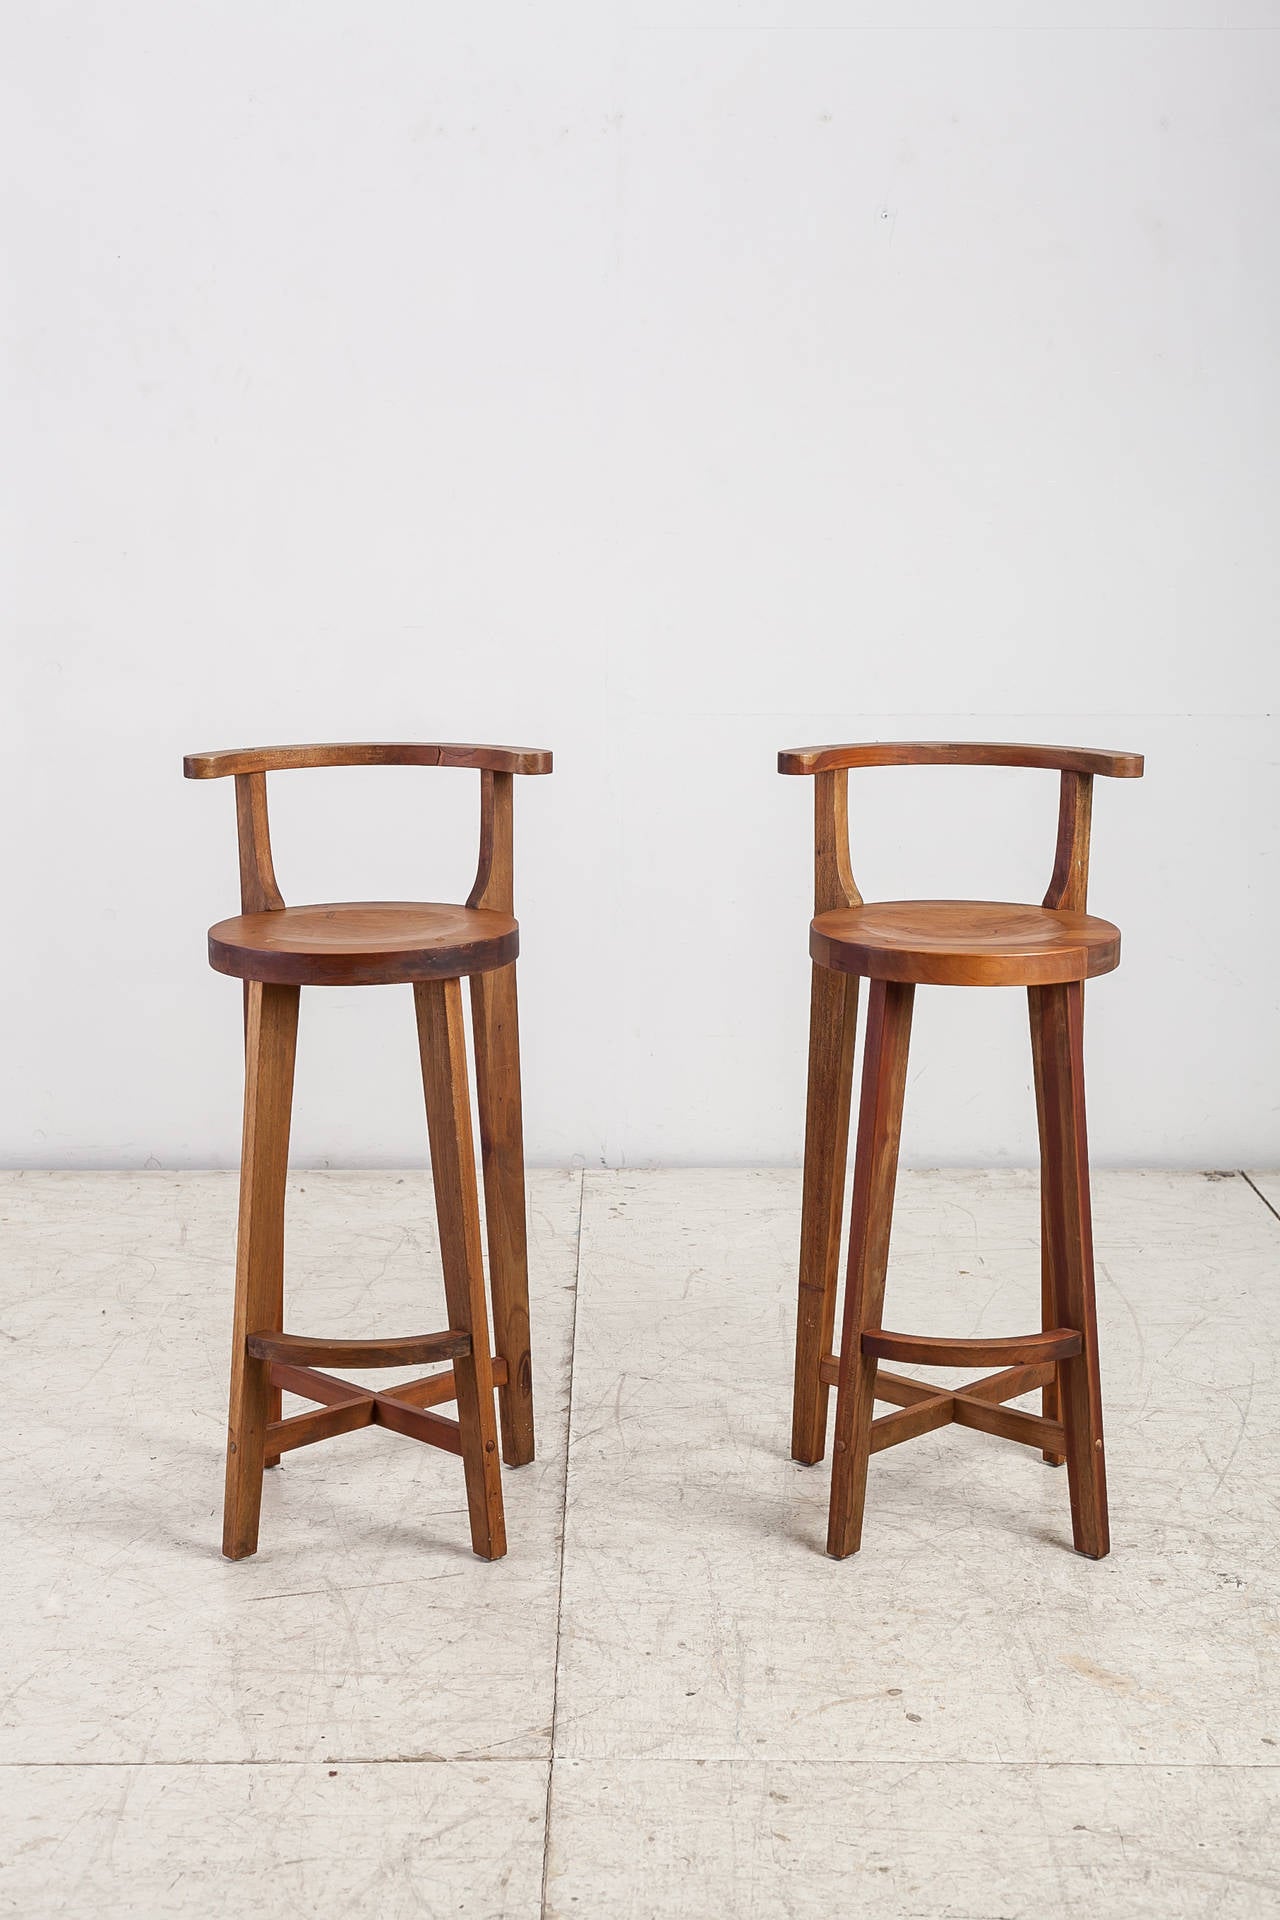 American Craftsman Pair Studio crafted wooden bar stools with rounded back rests For Sale